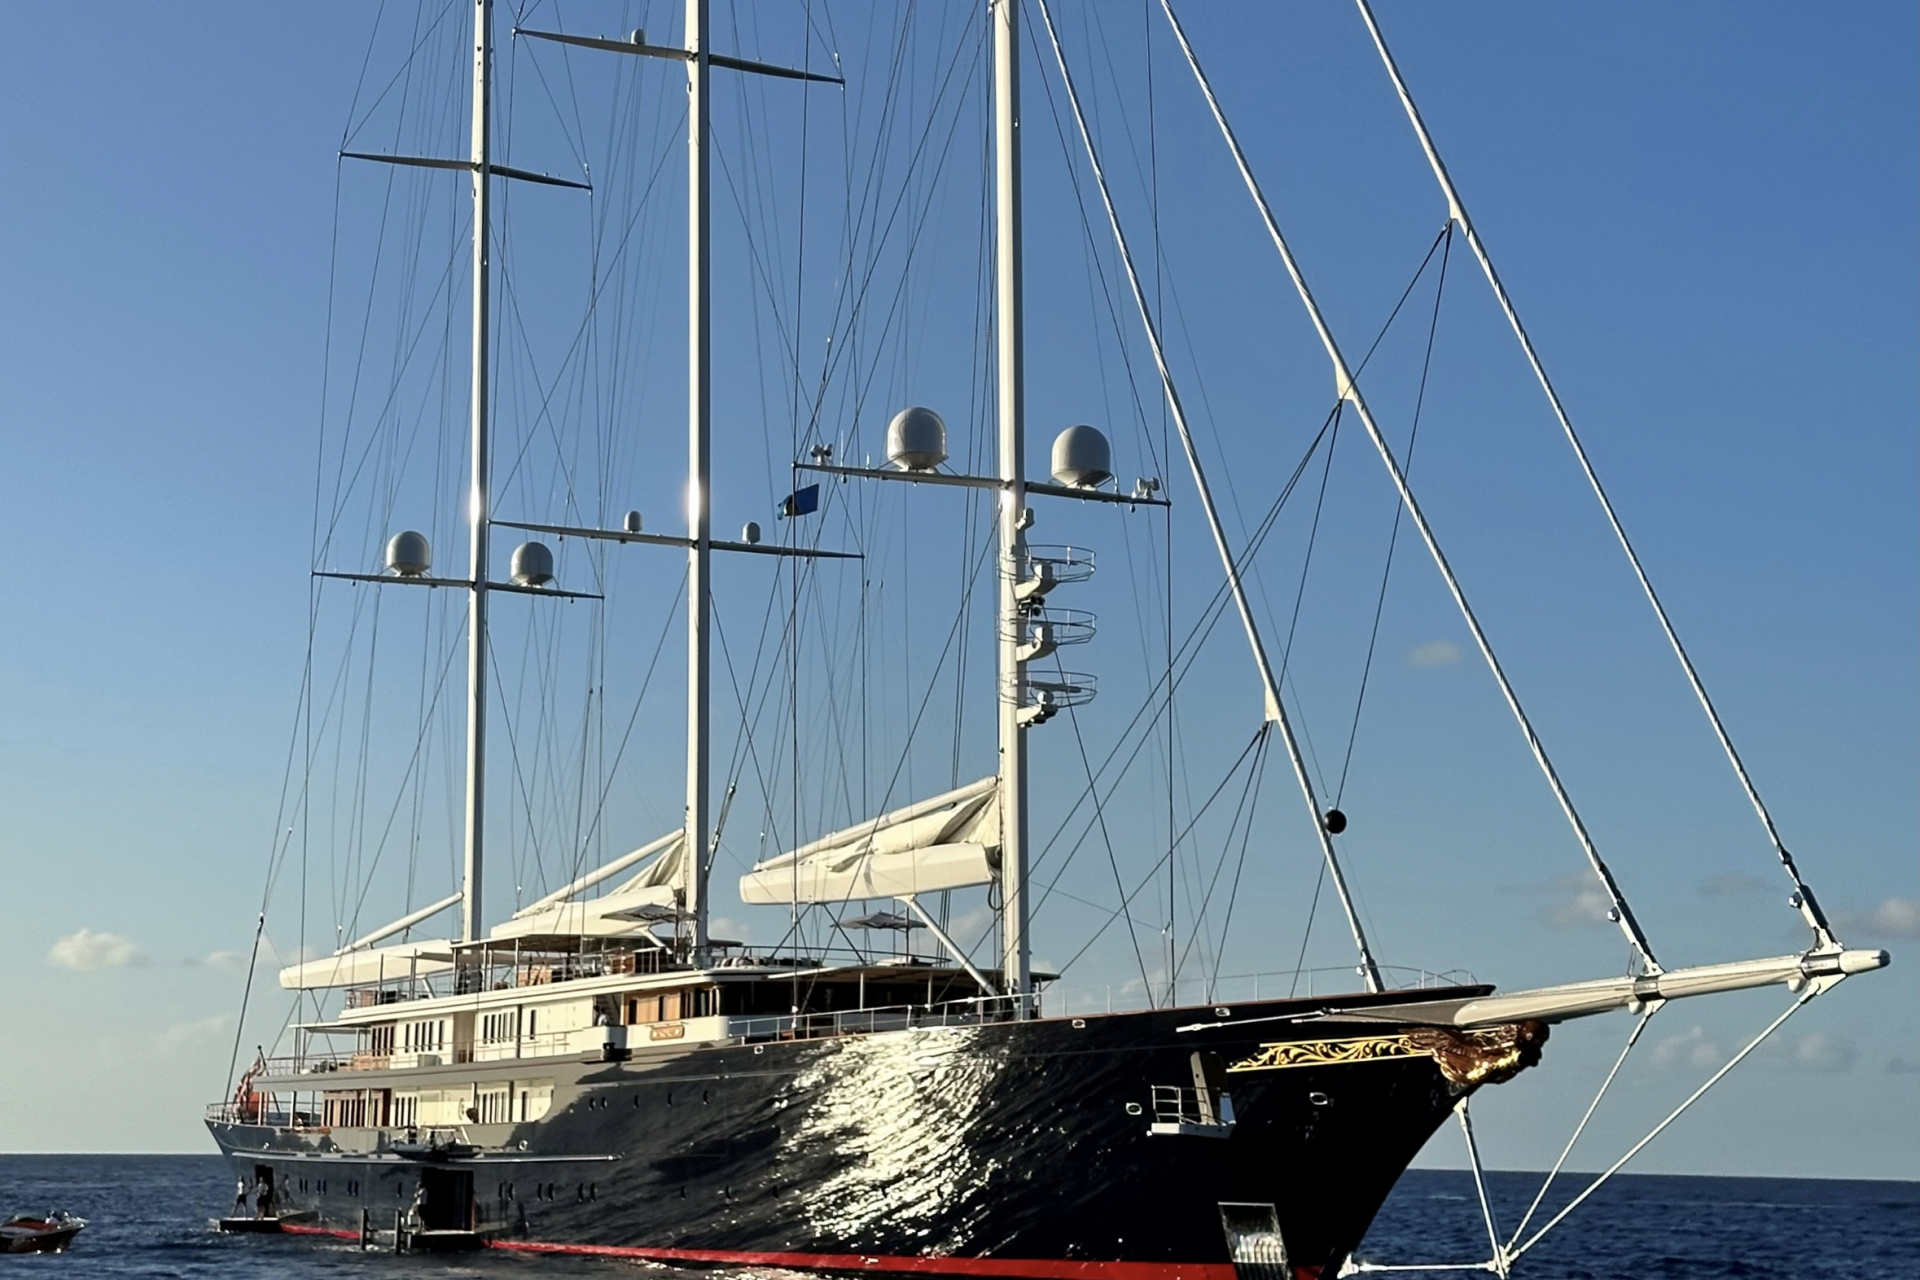 The world’s largest sailing vessel